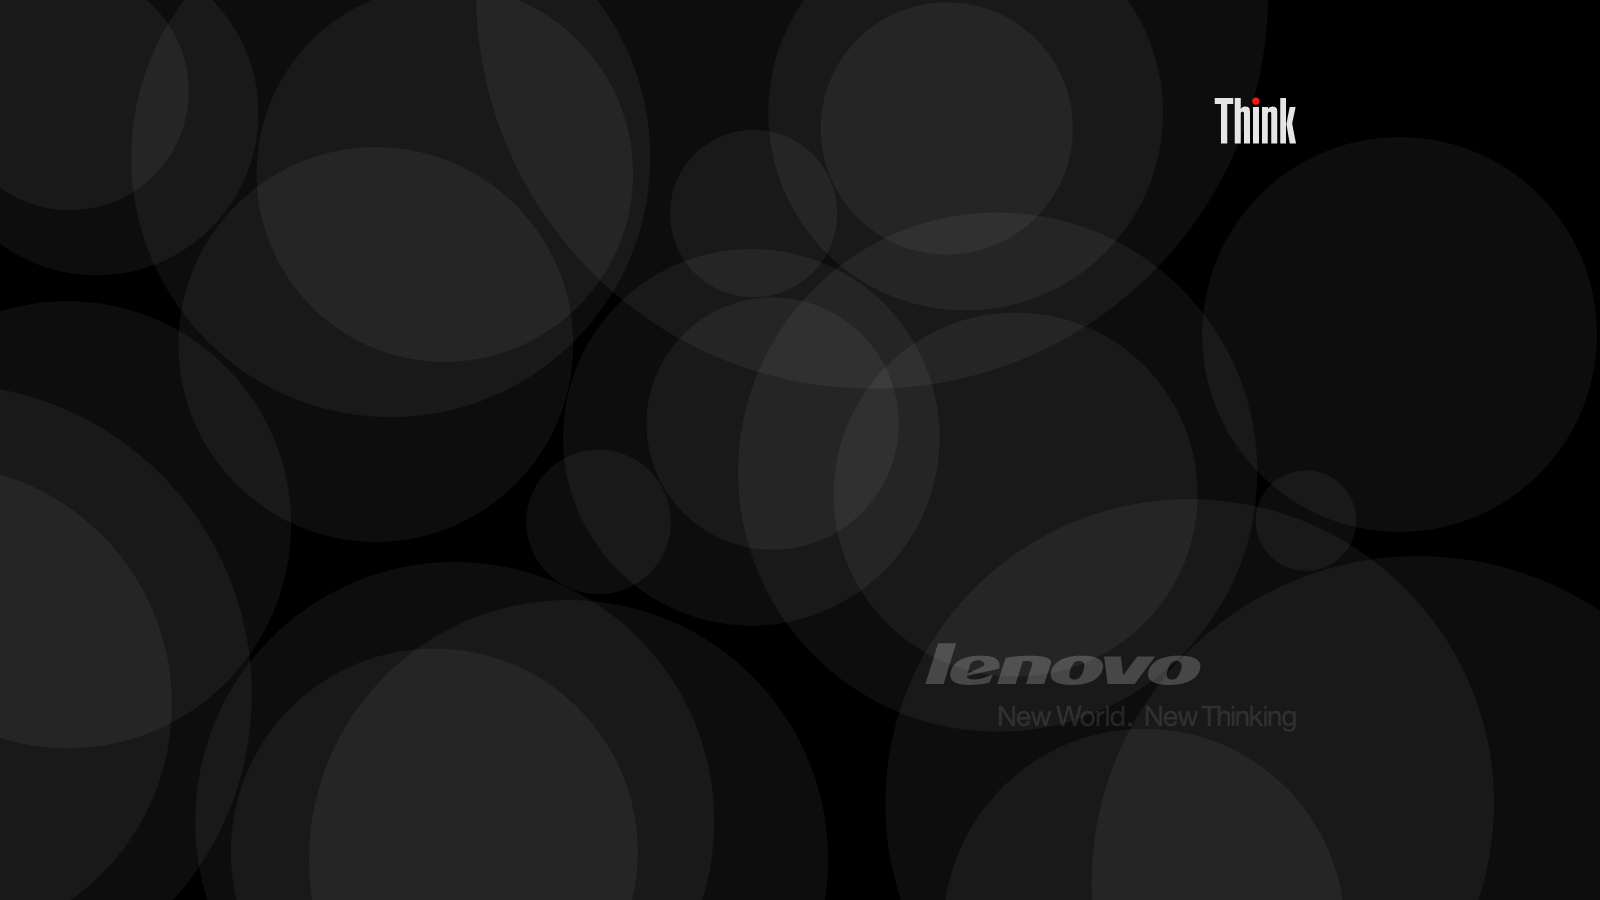 Thinking Lenovo HD Wallpaper Color Palette Tags